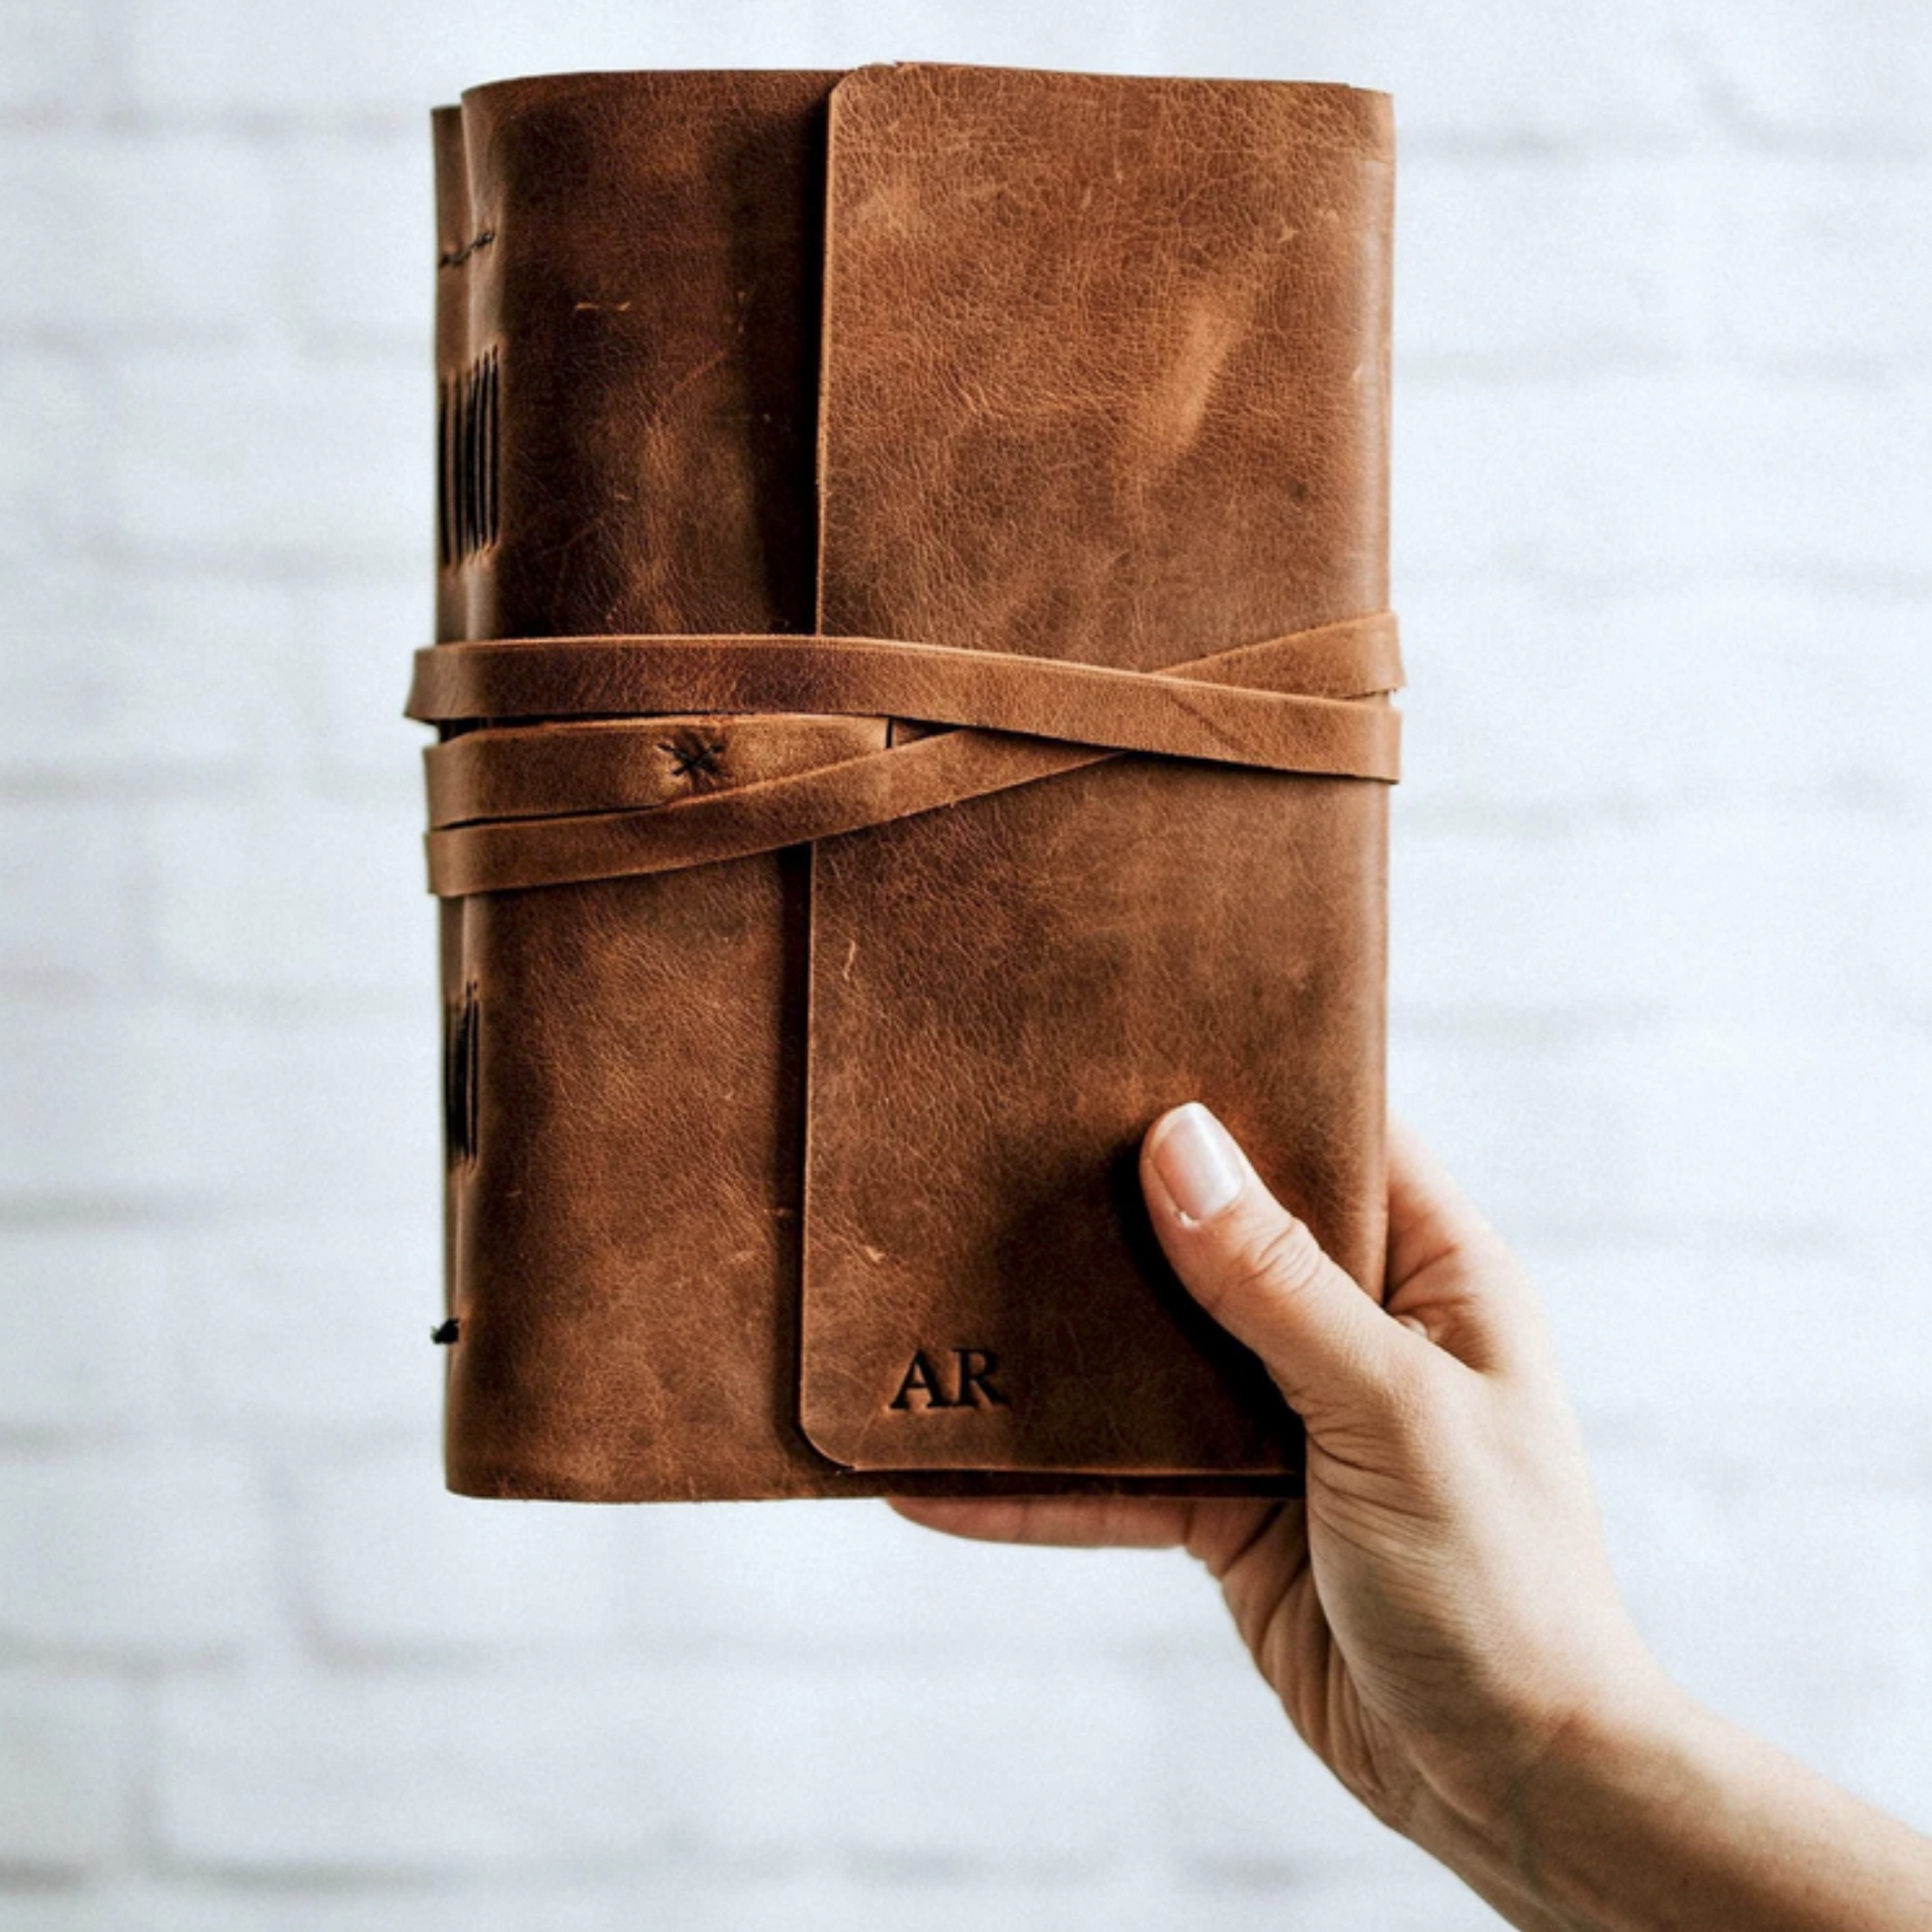 Refillable Leather Journal Handmade in Italy, Ruled - Lined Pages 6x9 Brown - 6x9 / Lined